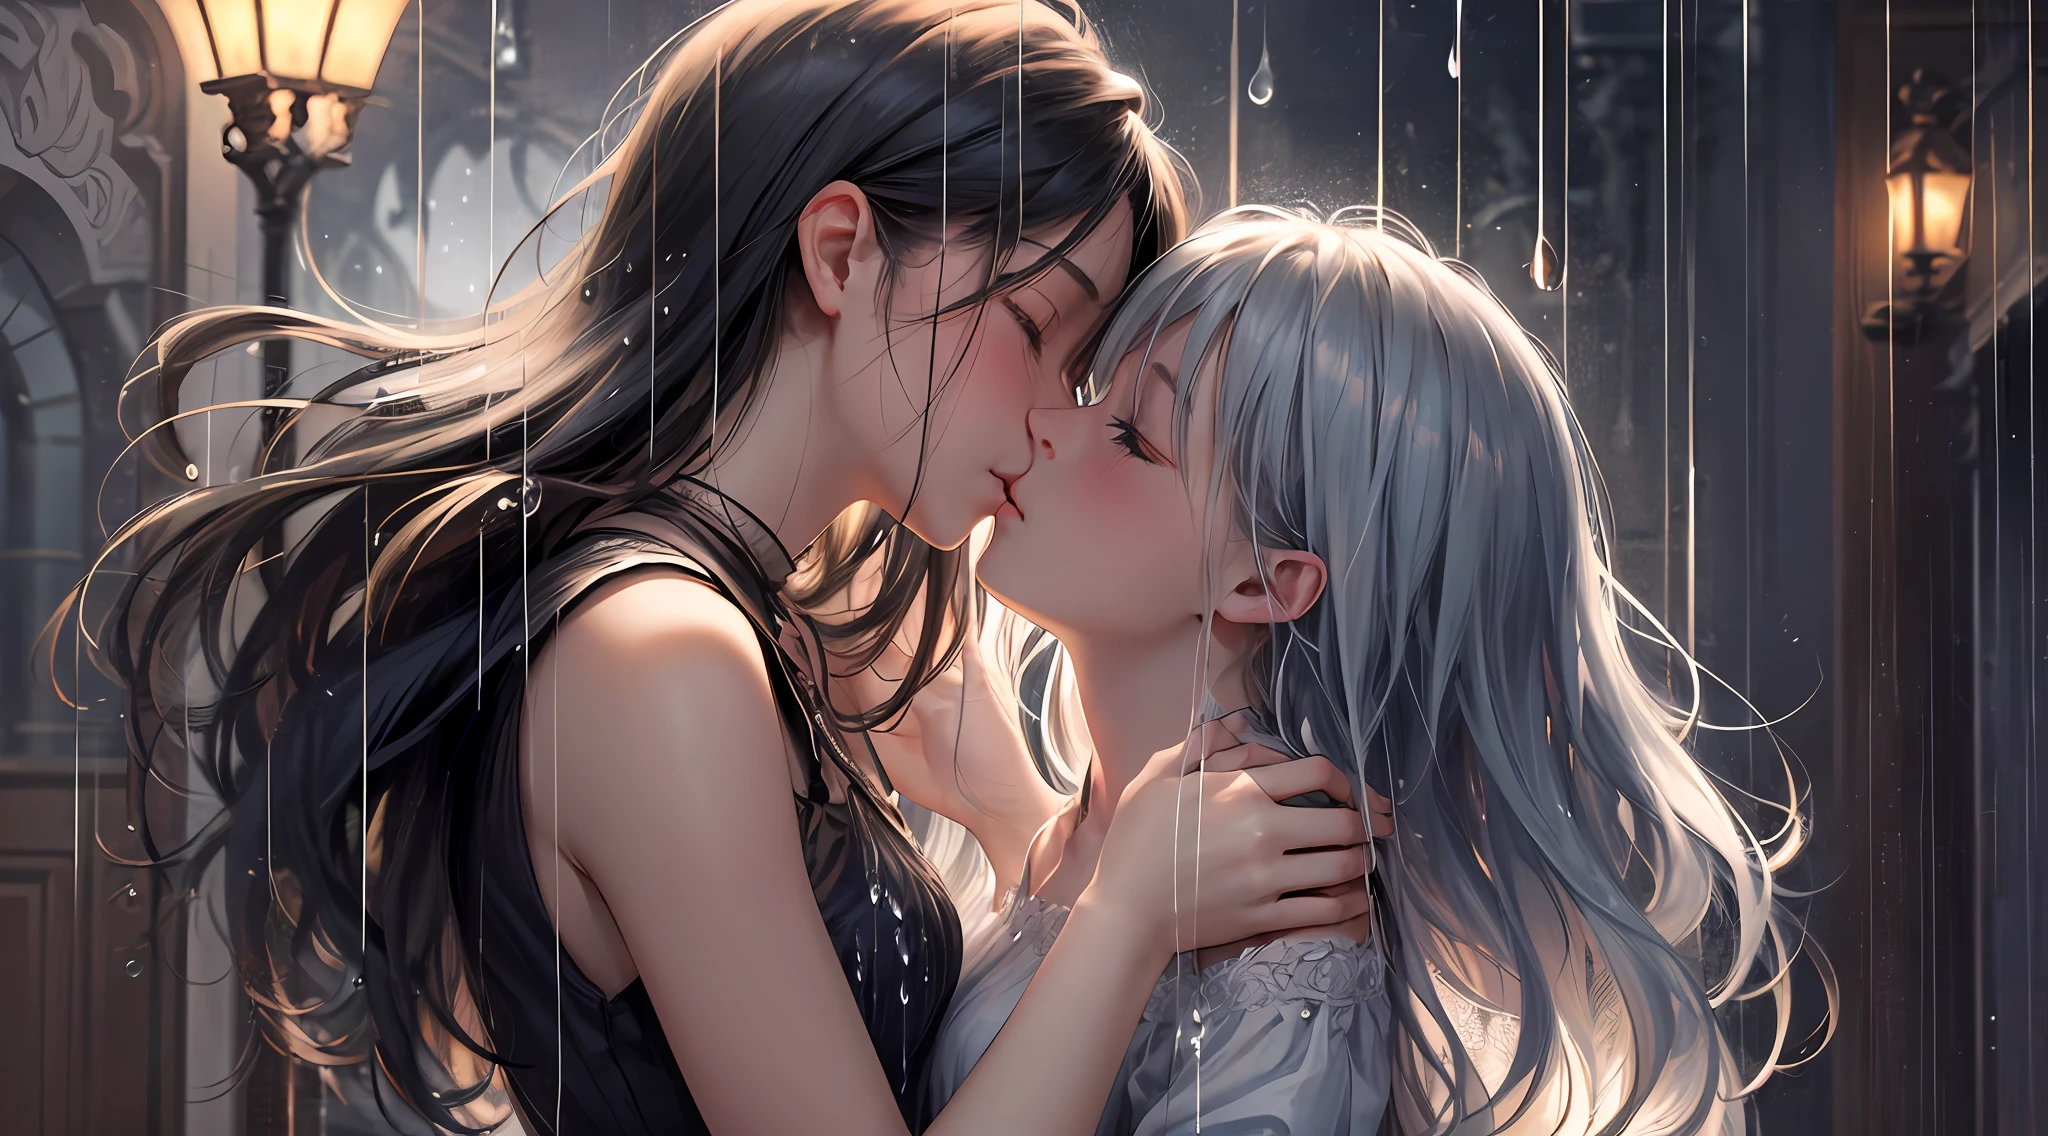 An upper-body portrait capturing a romantic and enchanting moment of a girl and a boy kissing in the rain. The raindrops cascade around them, adding a touch of magic and serenity to the scene. Their faces are partially obscured by the rain, creating a sense of intimacy and privacy. The girl's arms wrap gently around the boy's neck, drawing them closer together in a tender embrace. The overall composition exudes a sense of romance and beauty, as their connection transcends the world around them. The style is executed with soft brushstrokes and a warm color palette, emphasizing the emotional depth and the ethereal atmosphere of the moment.